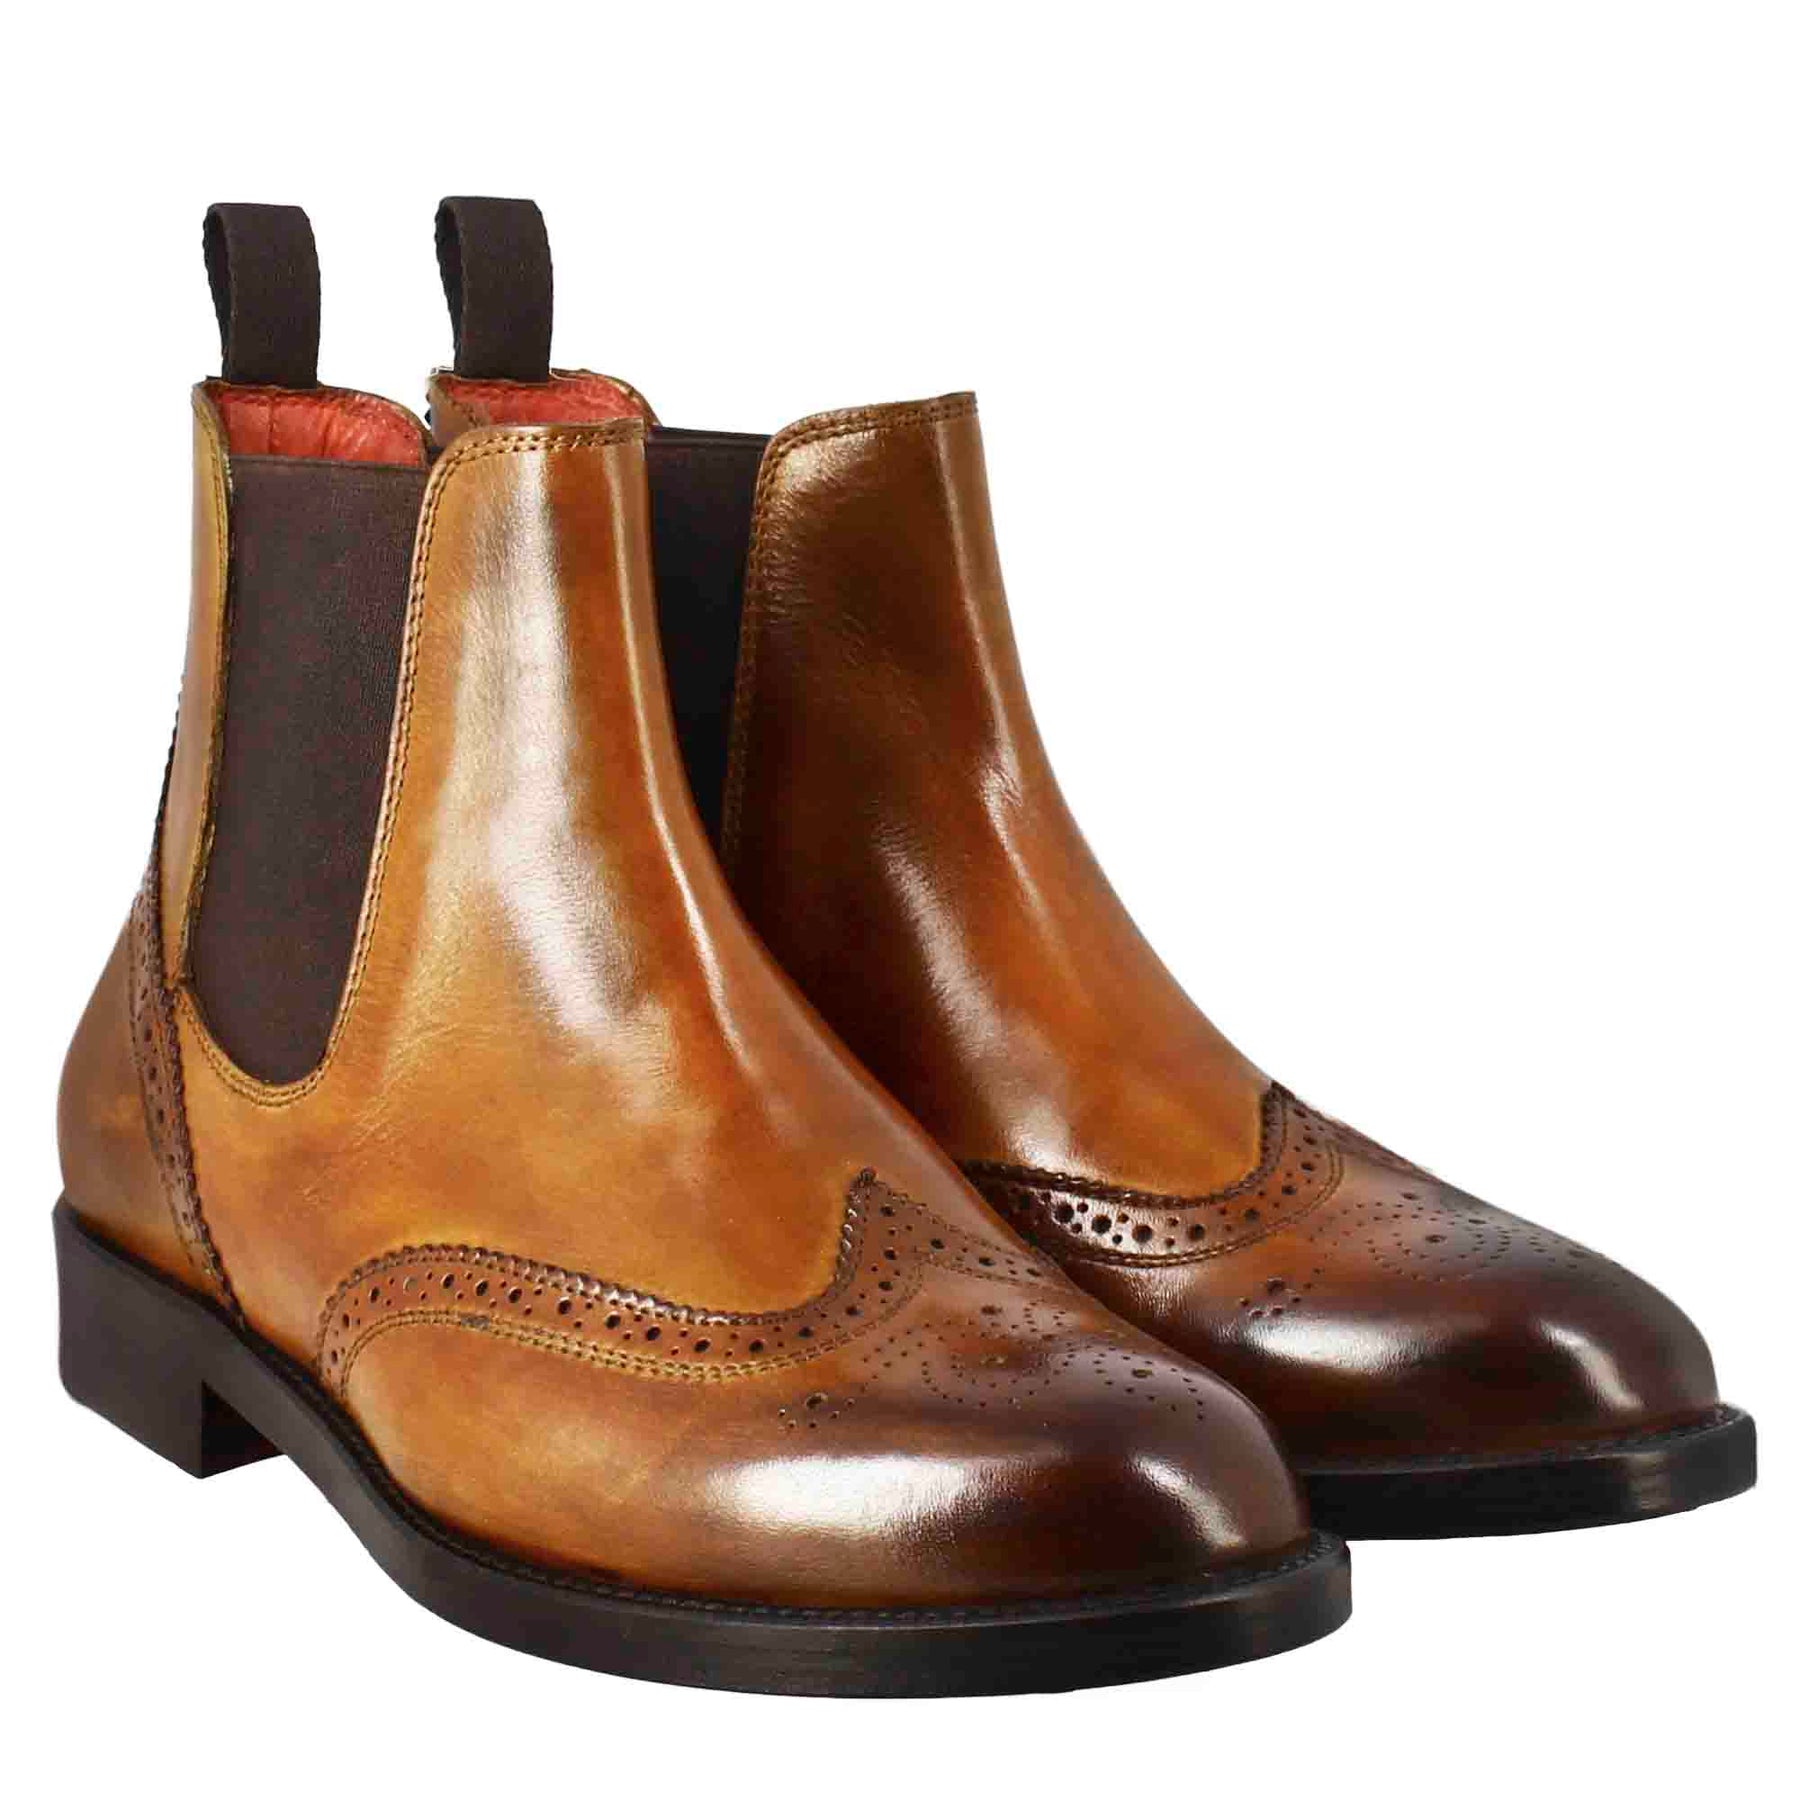 Women's Chelsea boot with brogue details in light brown leather